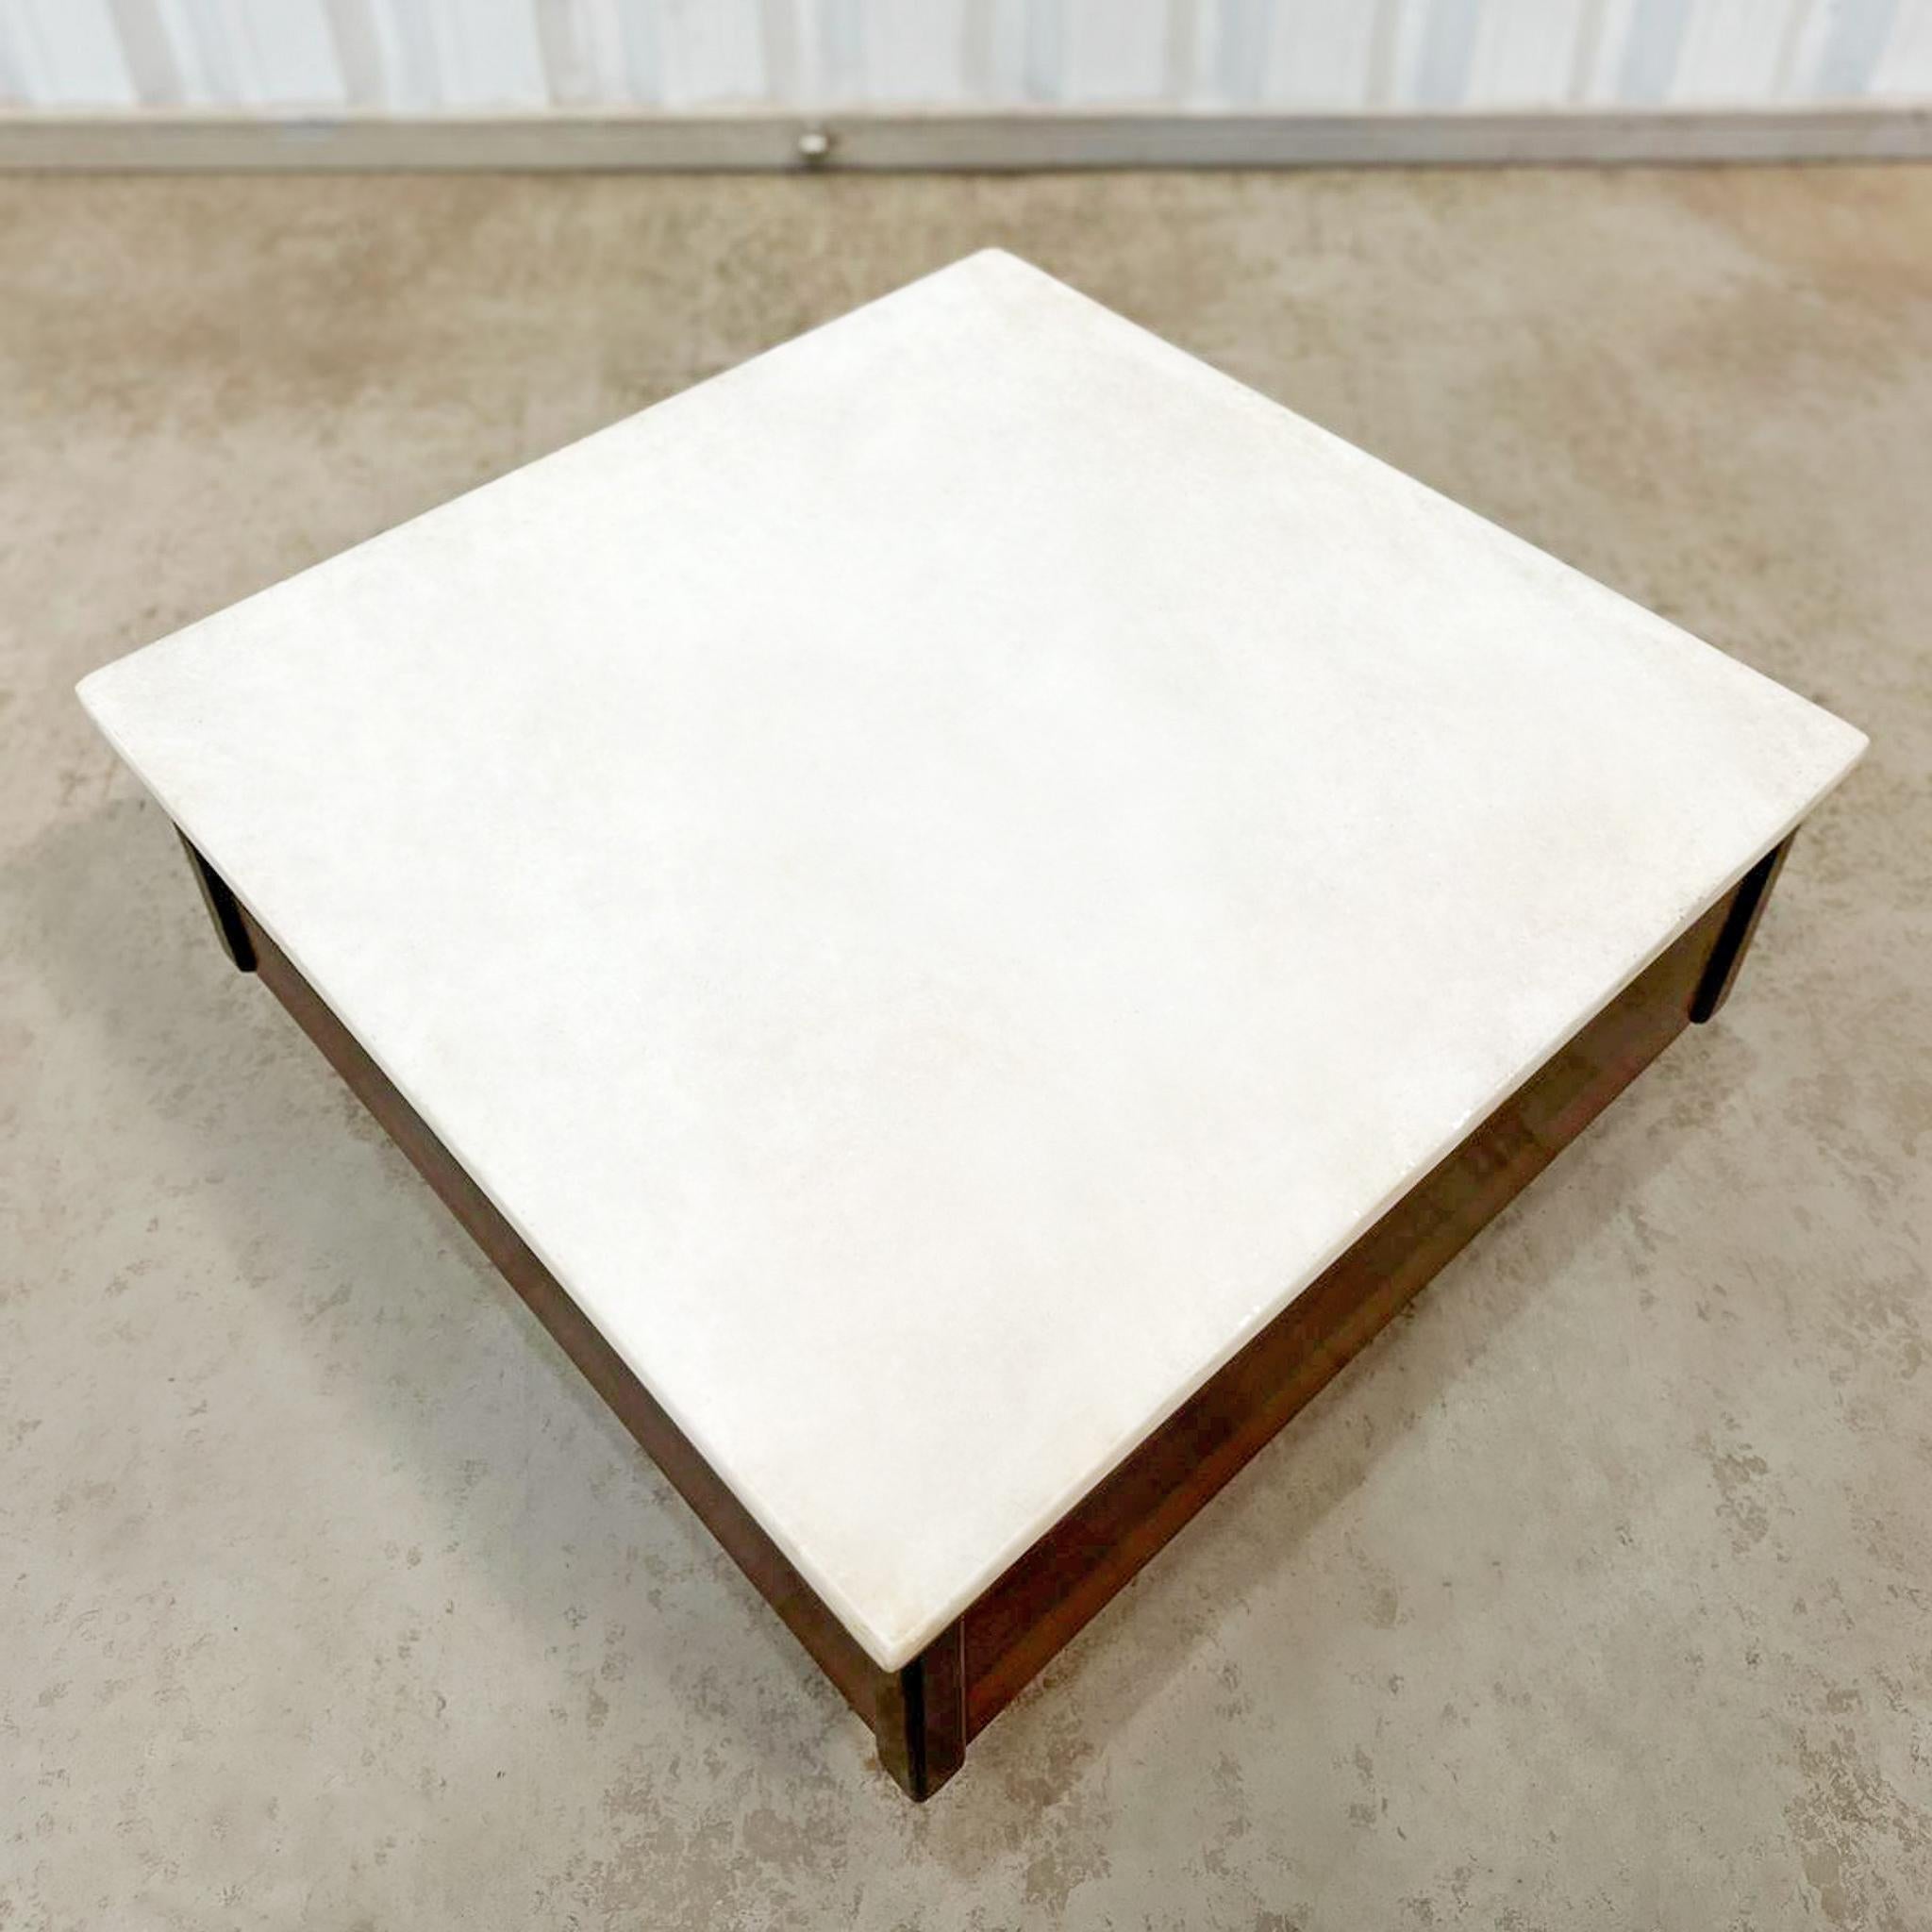 Brazilian Modern Coffee Table in Hardwood & Marble Top, Unknown, c. 1960 For Sale 3